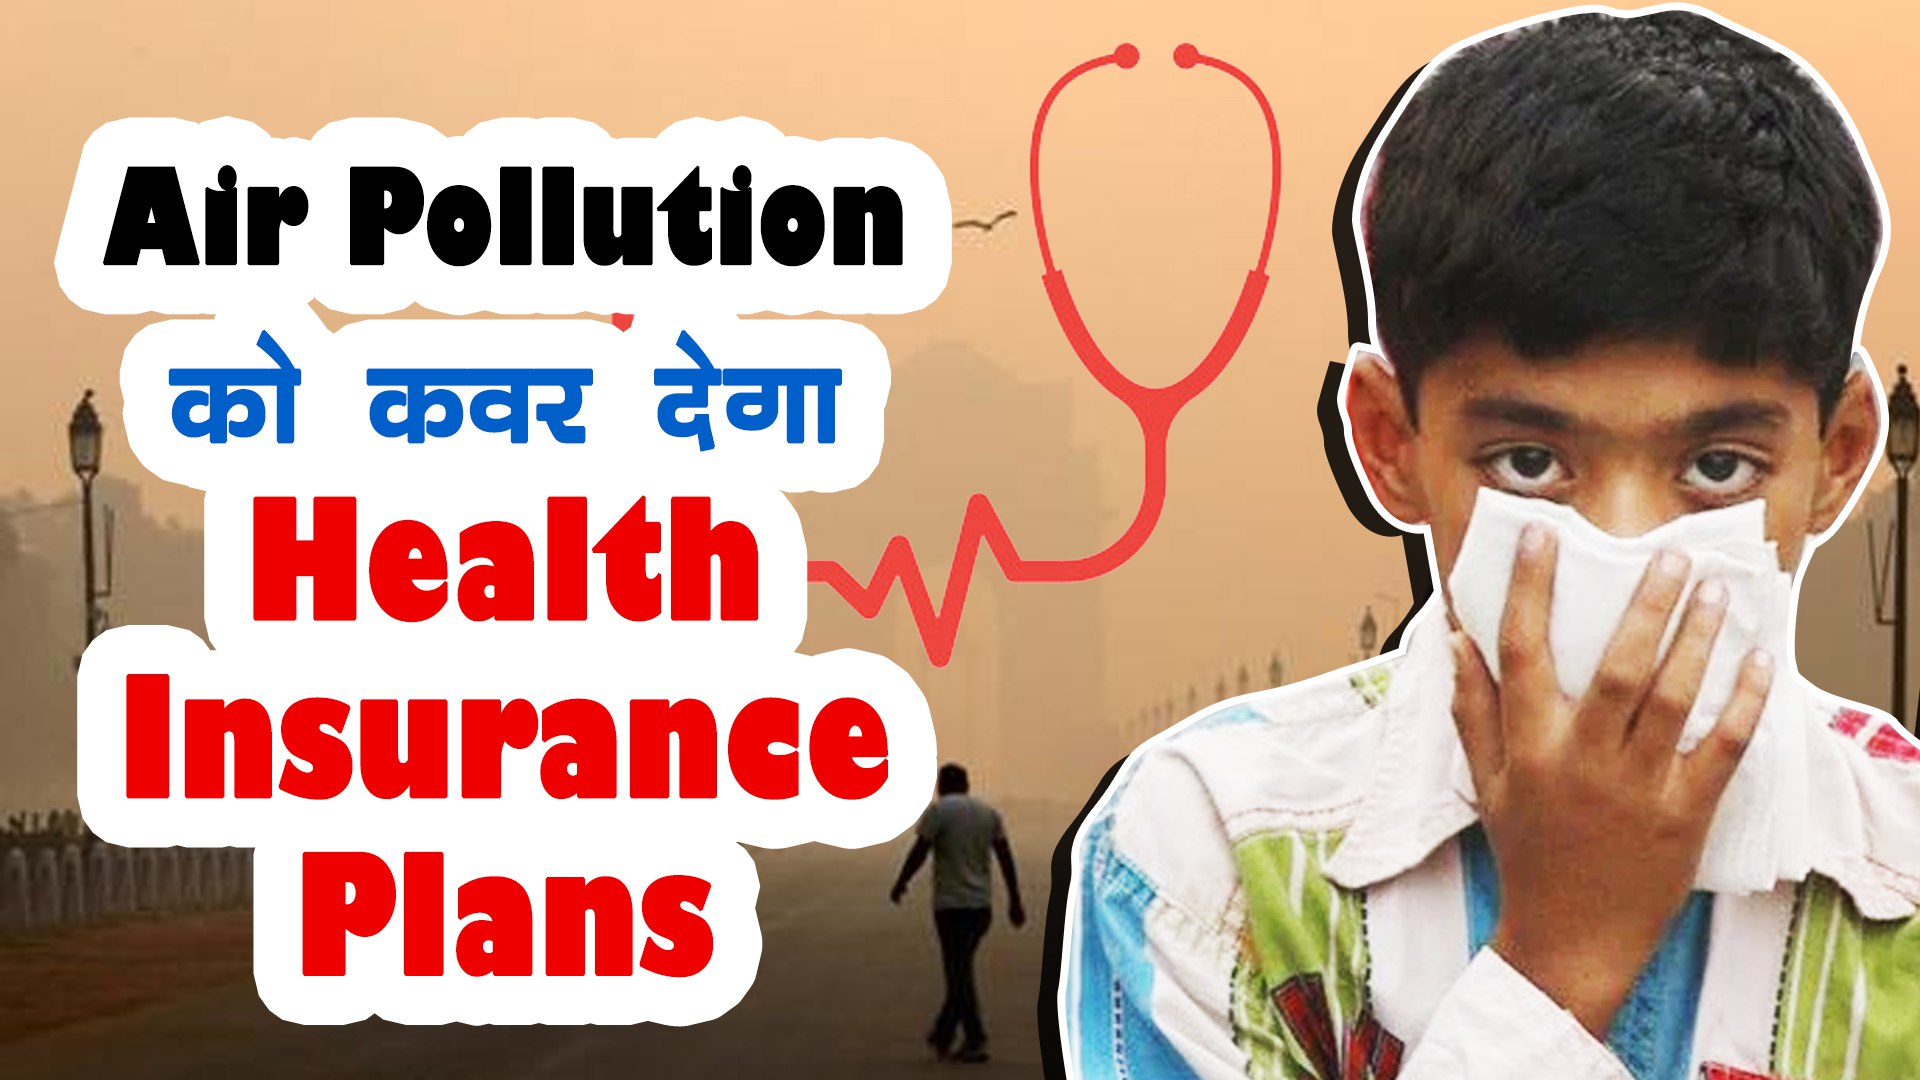 Health insurance also covers diseases caused by air pollution